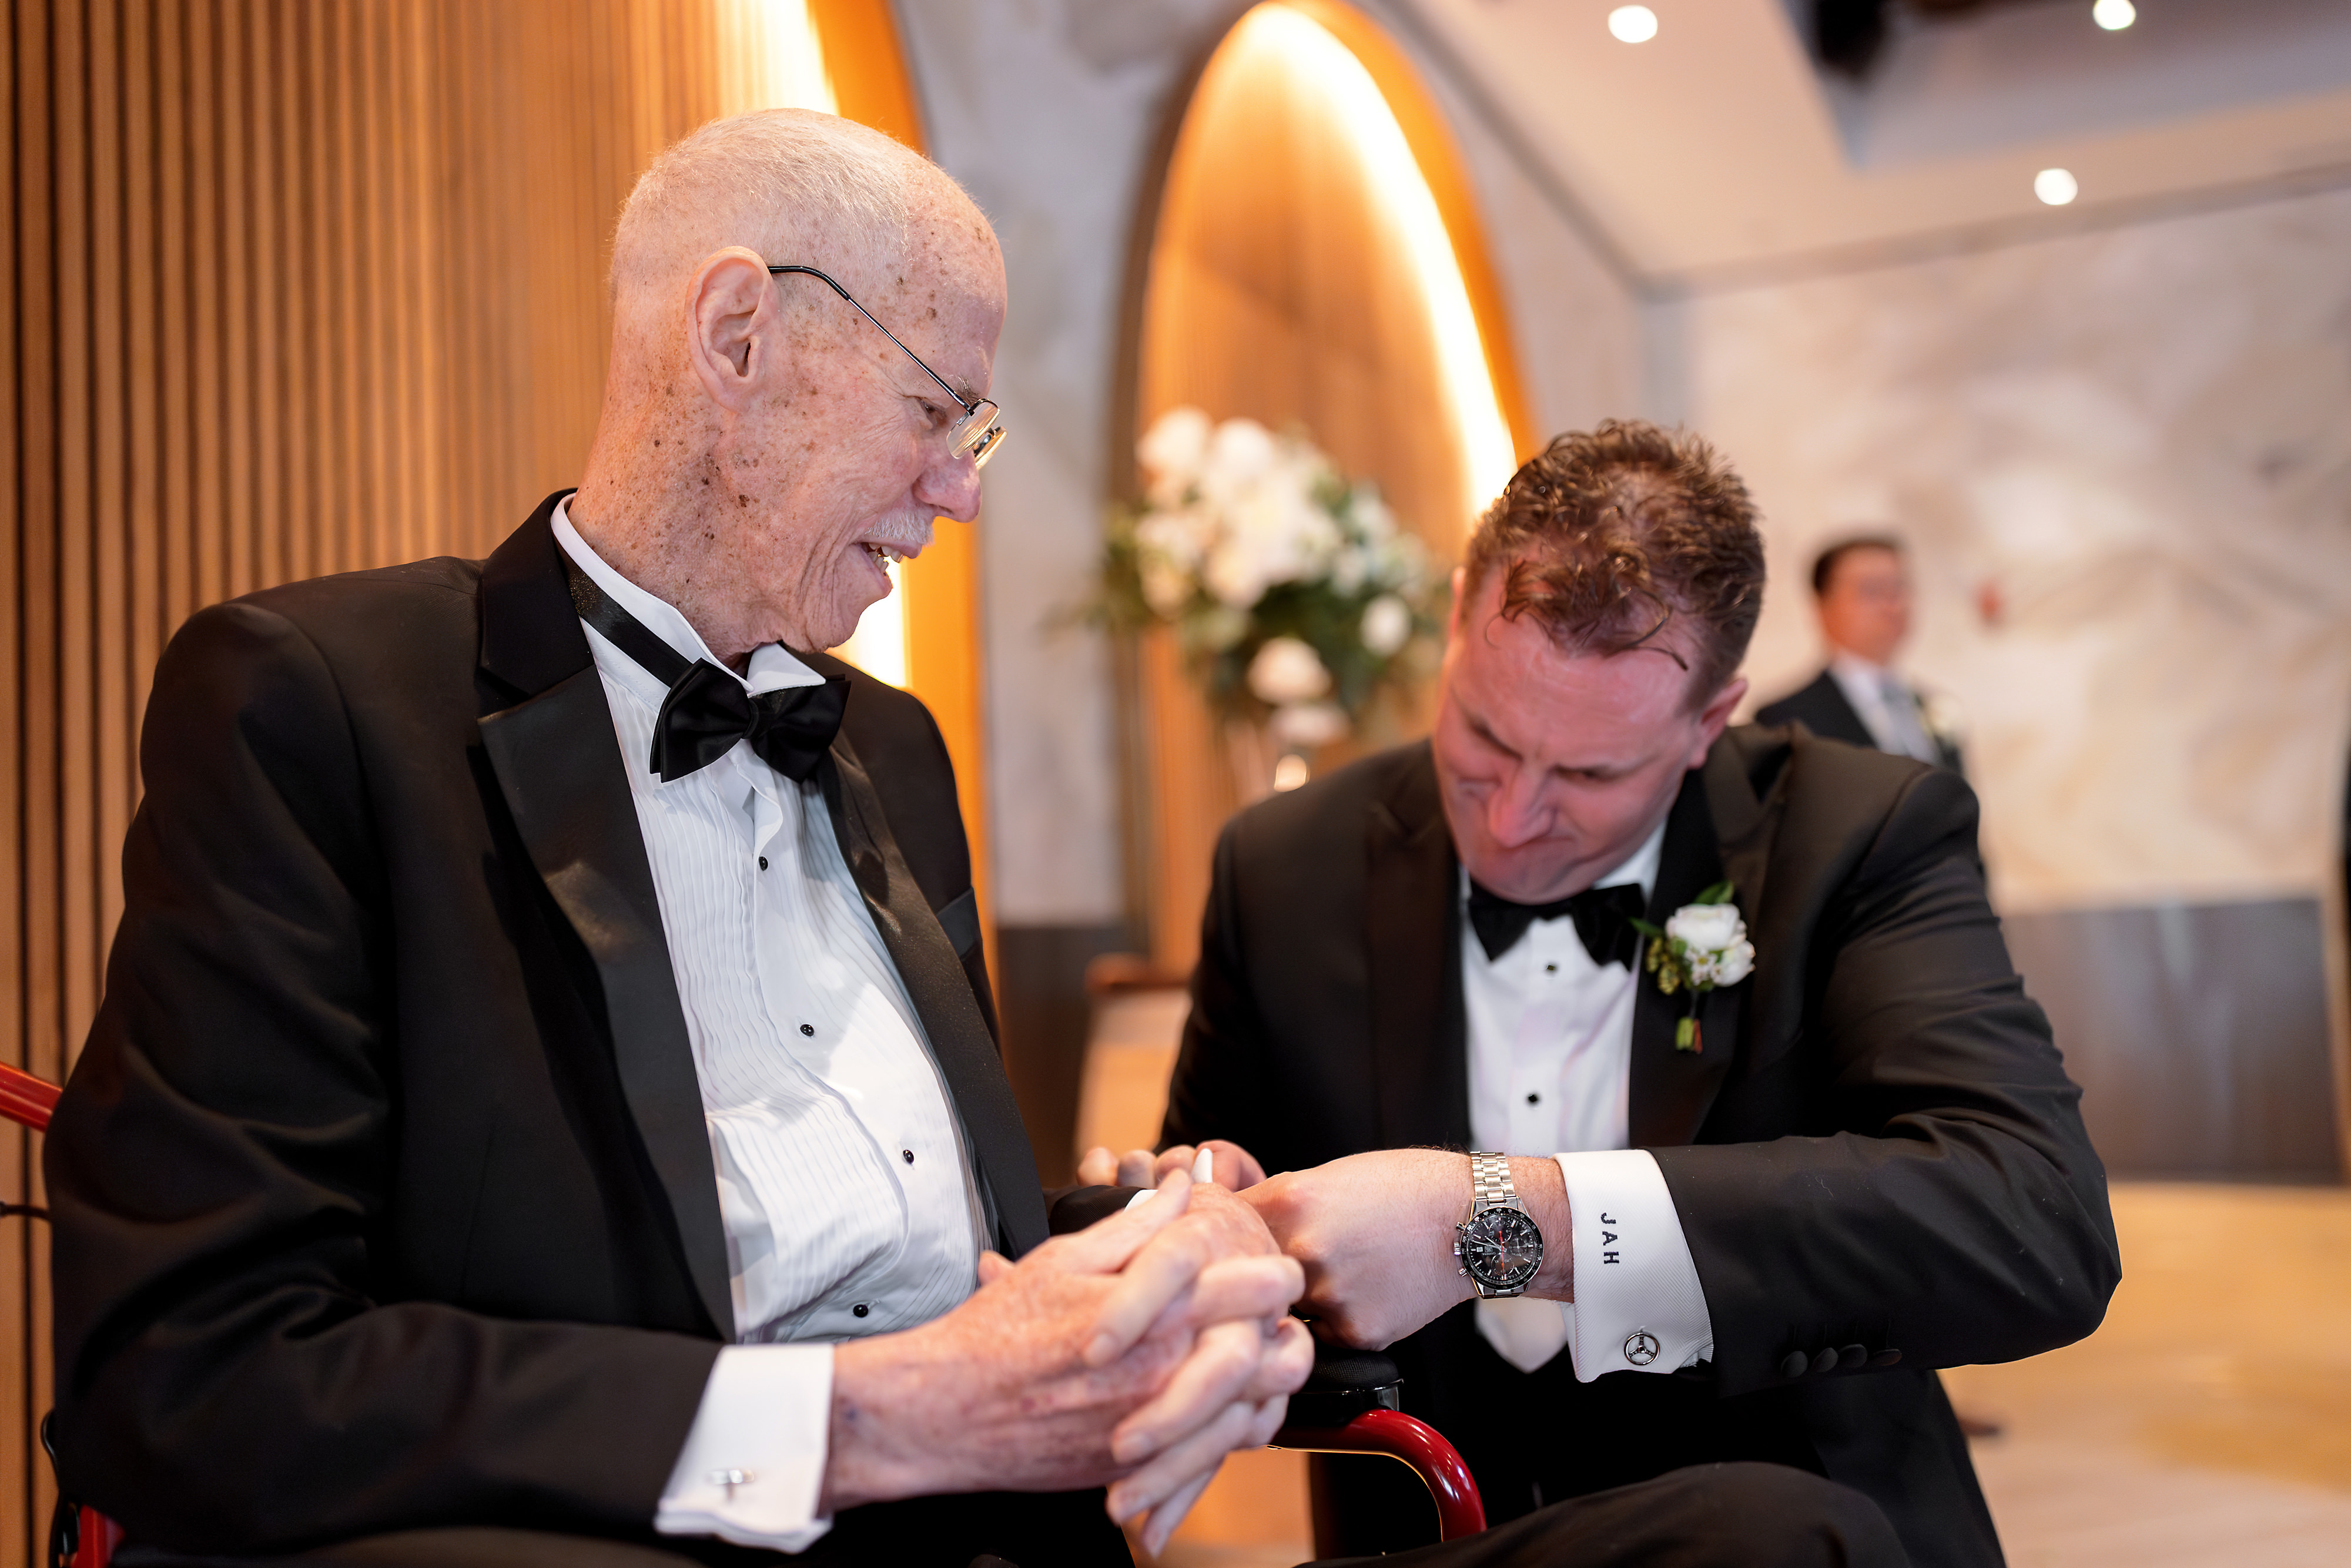 Groom helps father-in-law with cuff link before wedding ceremony at Chicago Winery